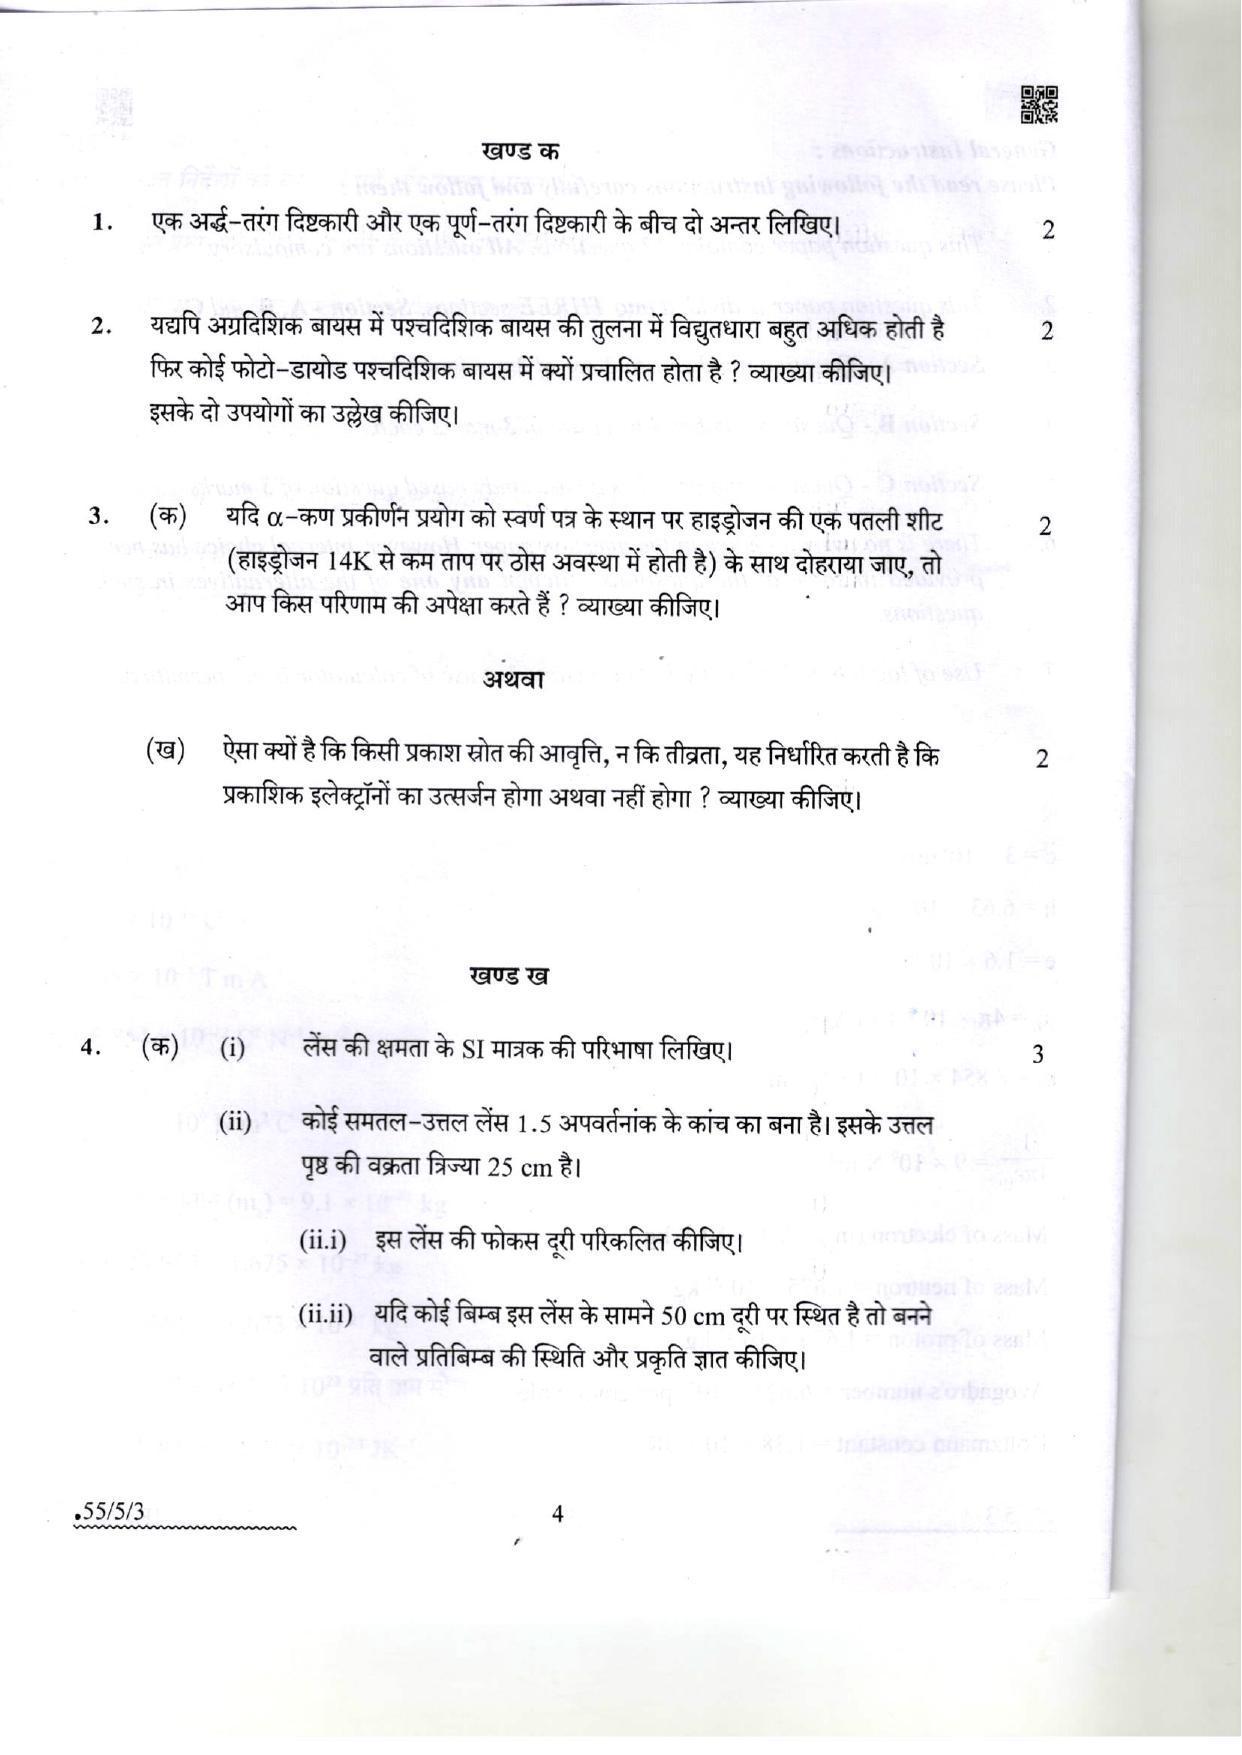 CBSE Class 12 55-5-3 Physics 2022 Question Paper - Page 4